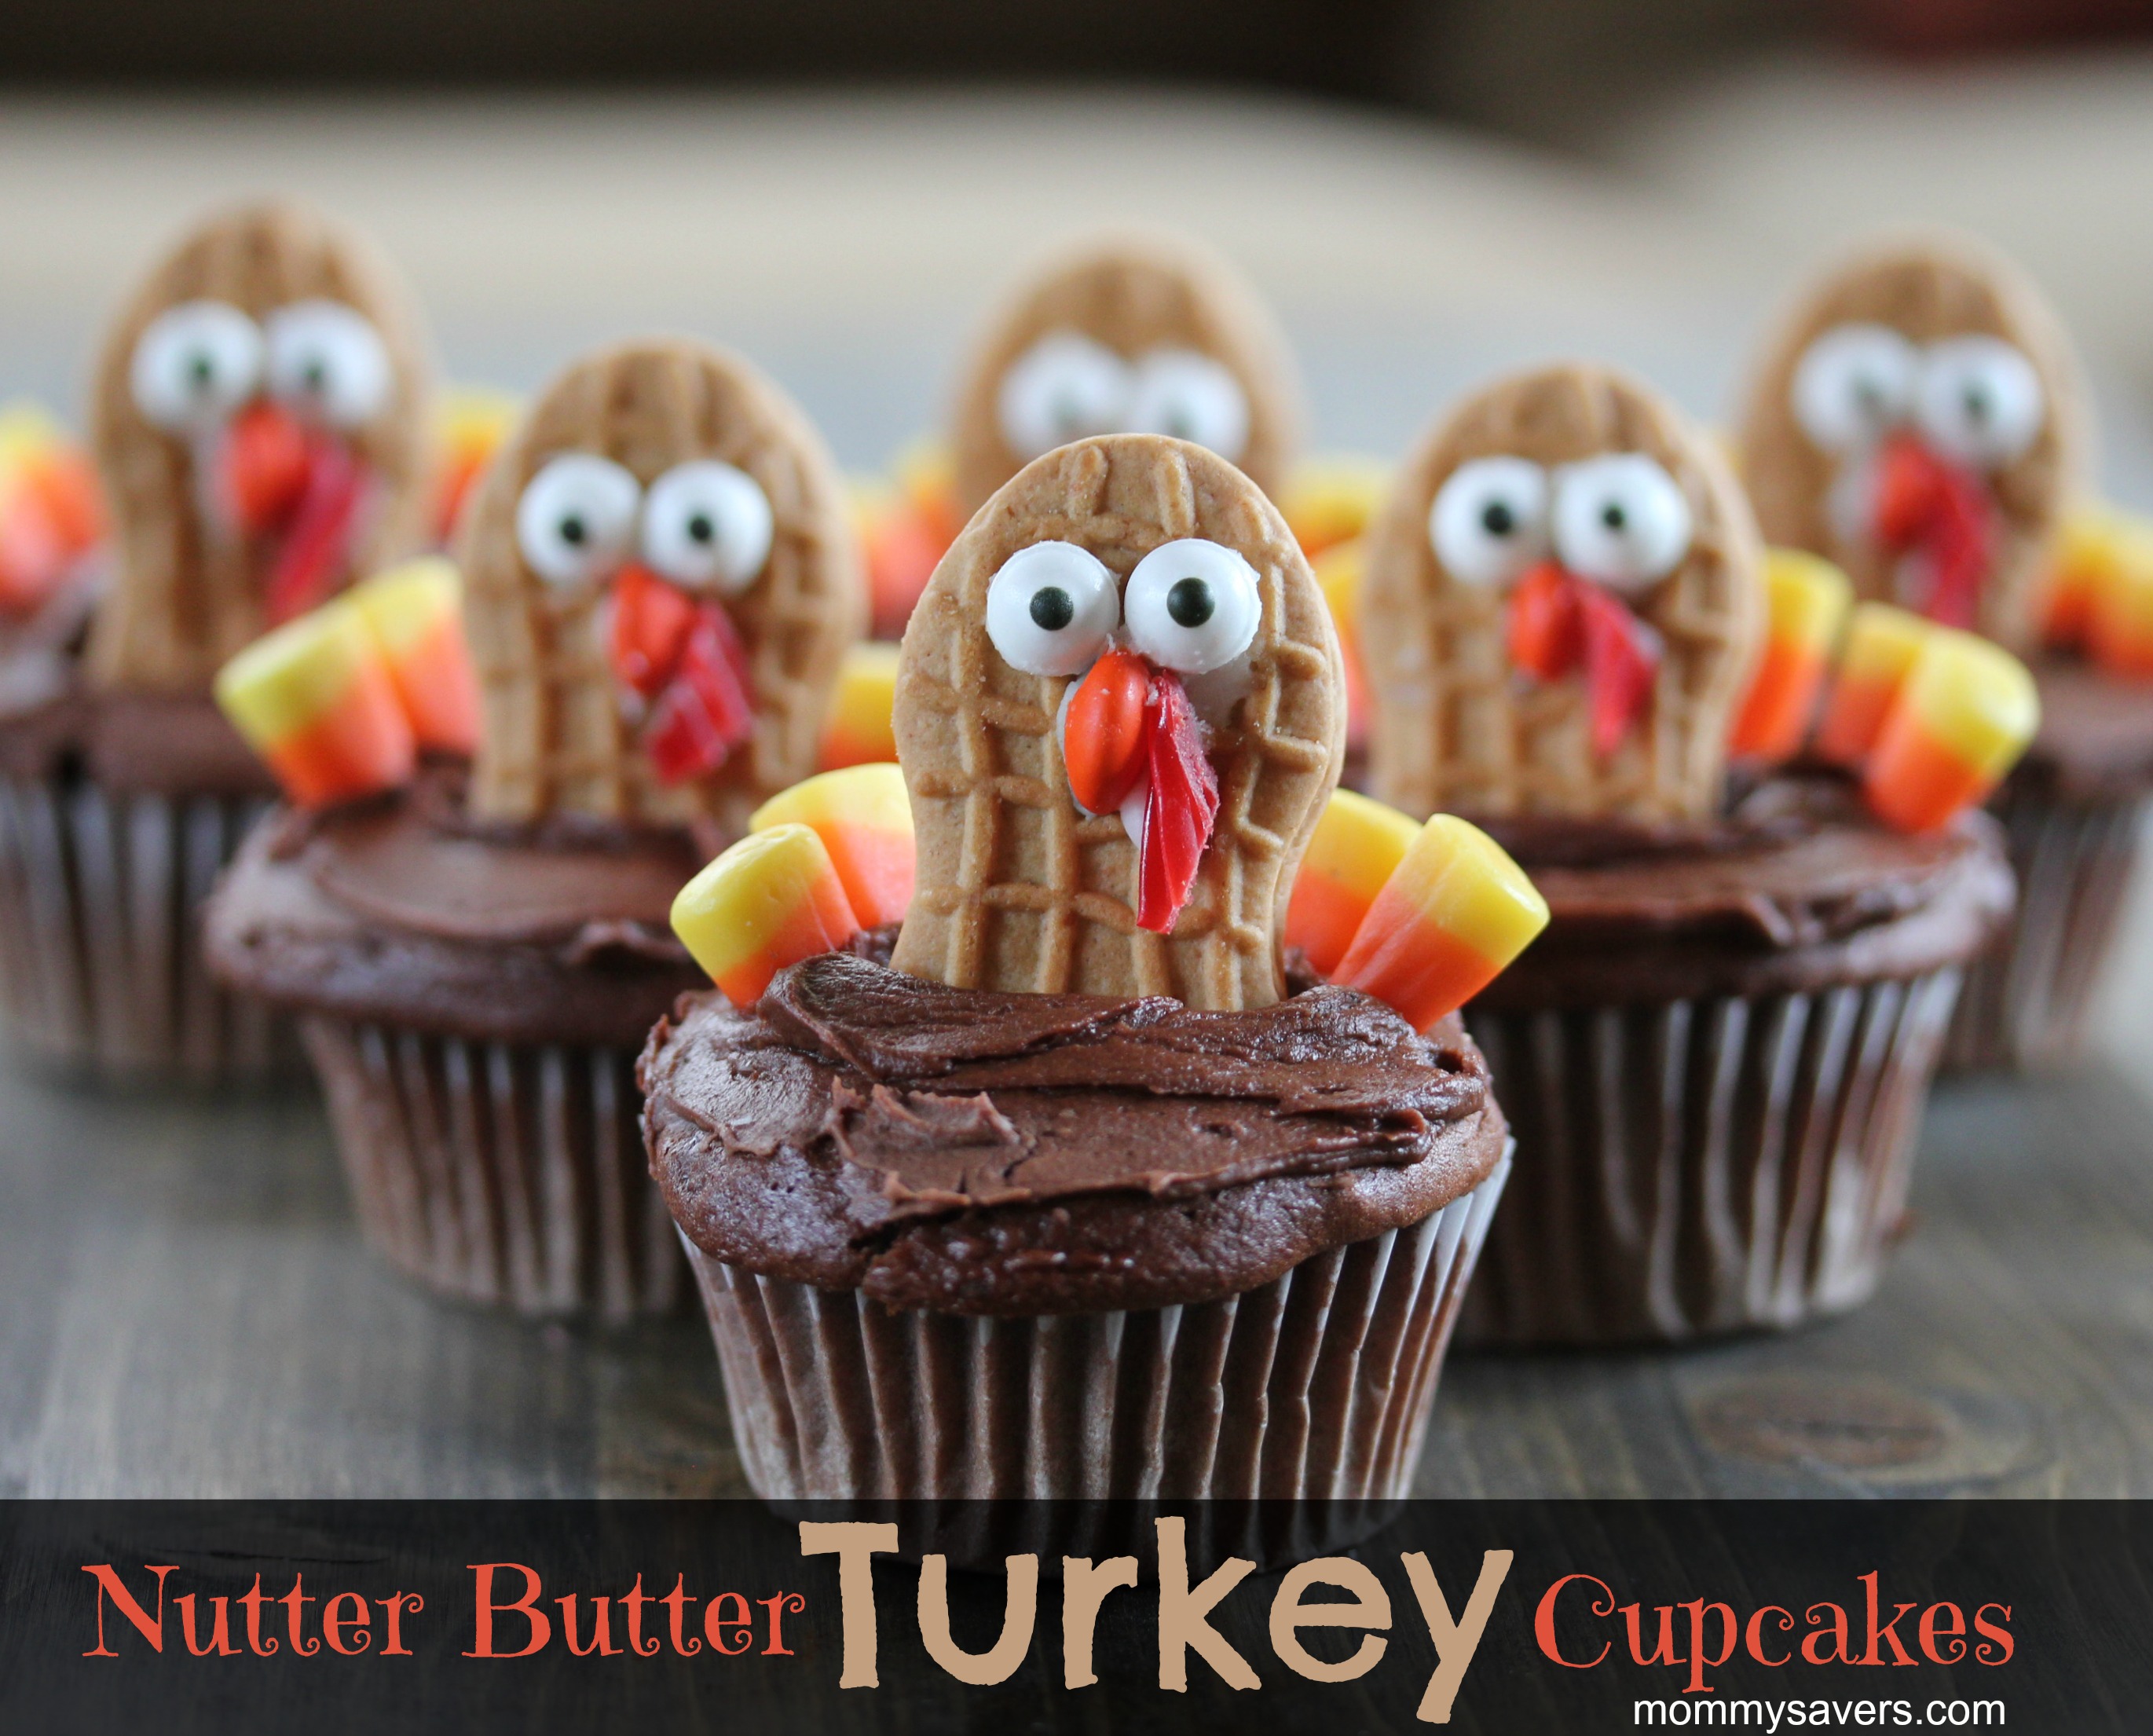 Nutter Butter Turkey Cupcakes - Mommysavers